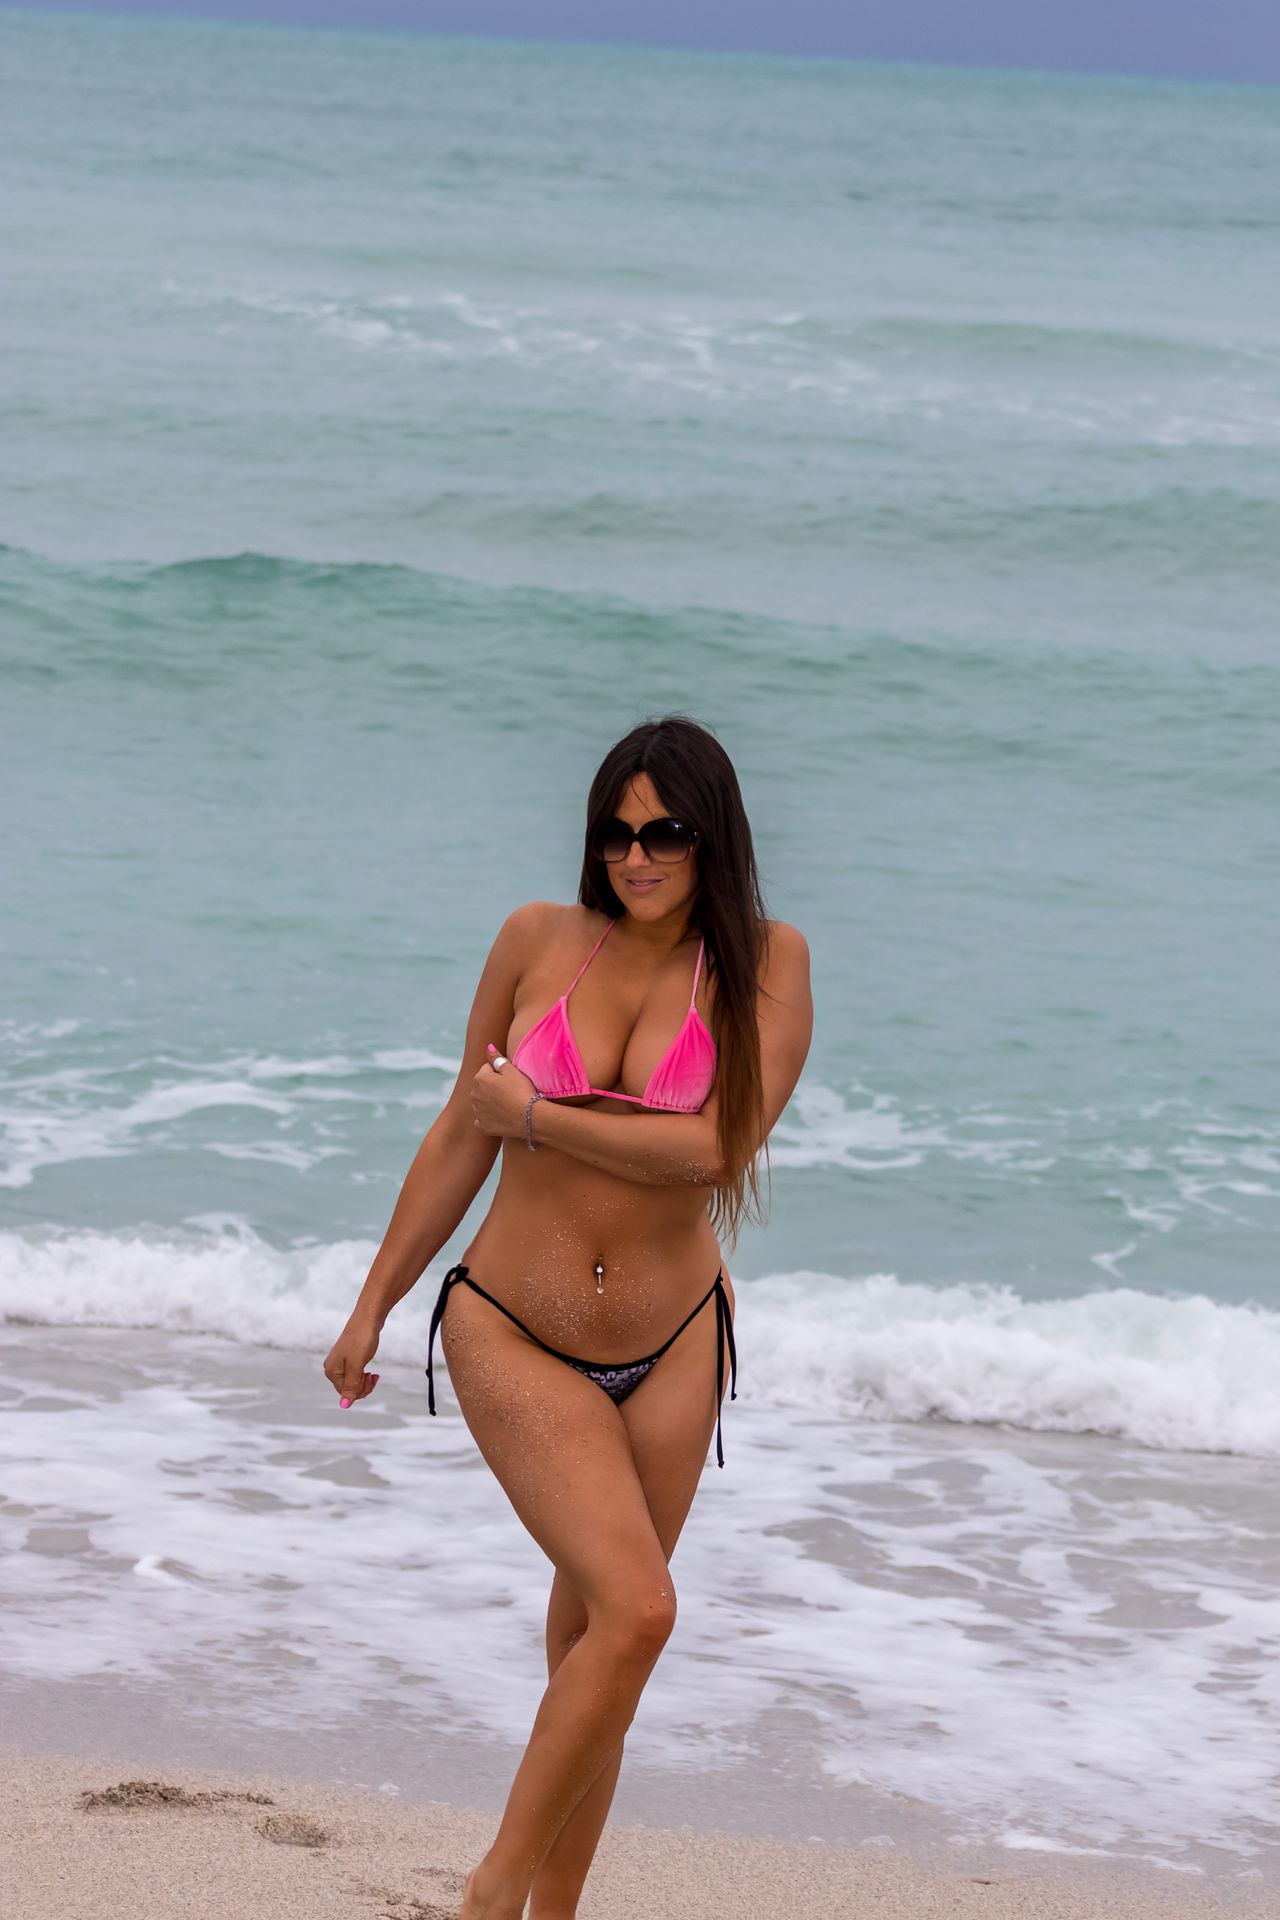 Claudia Romani Shows Off Her Curves in a Mismatched Thong Bikini (30 Photos)